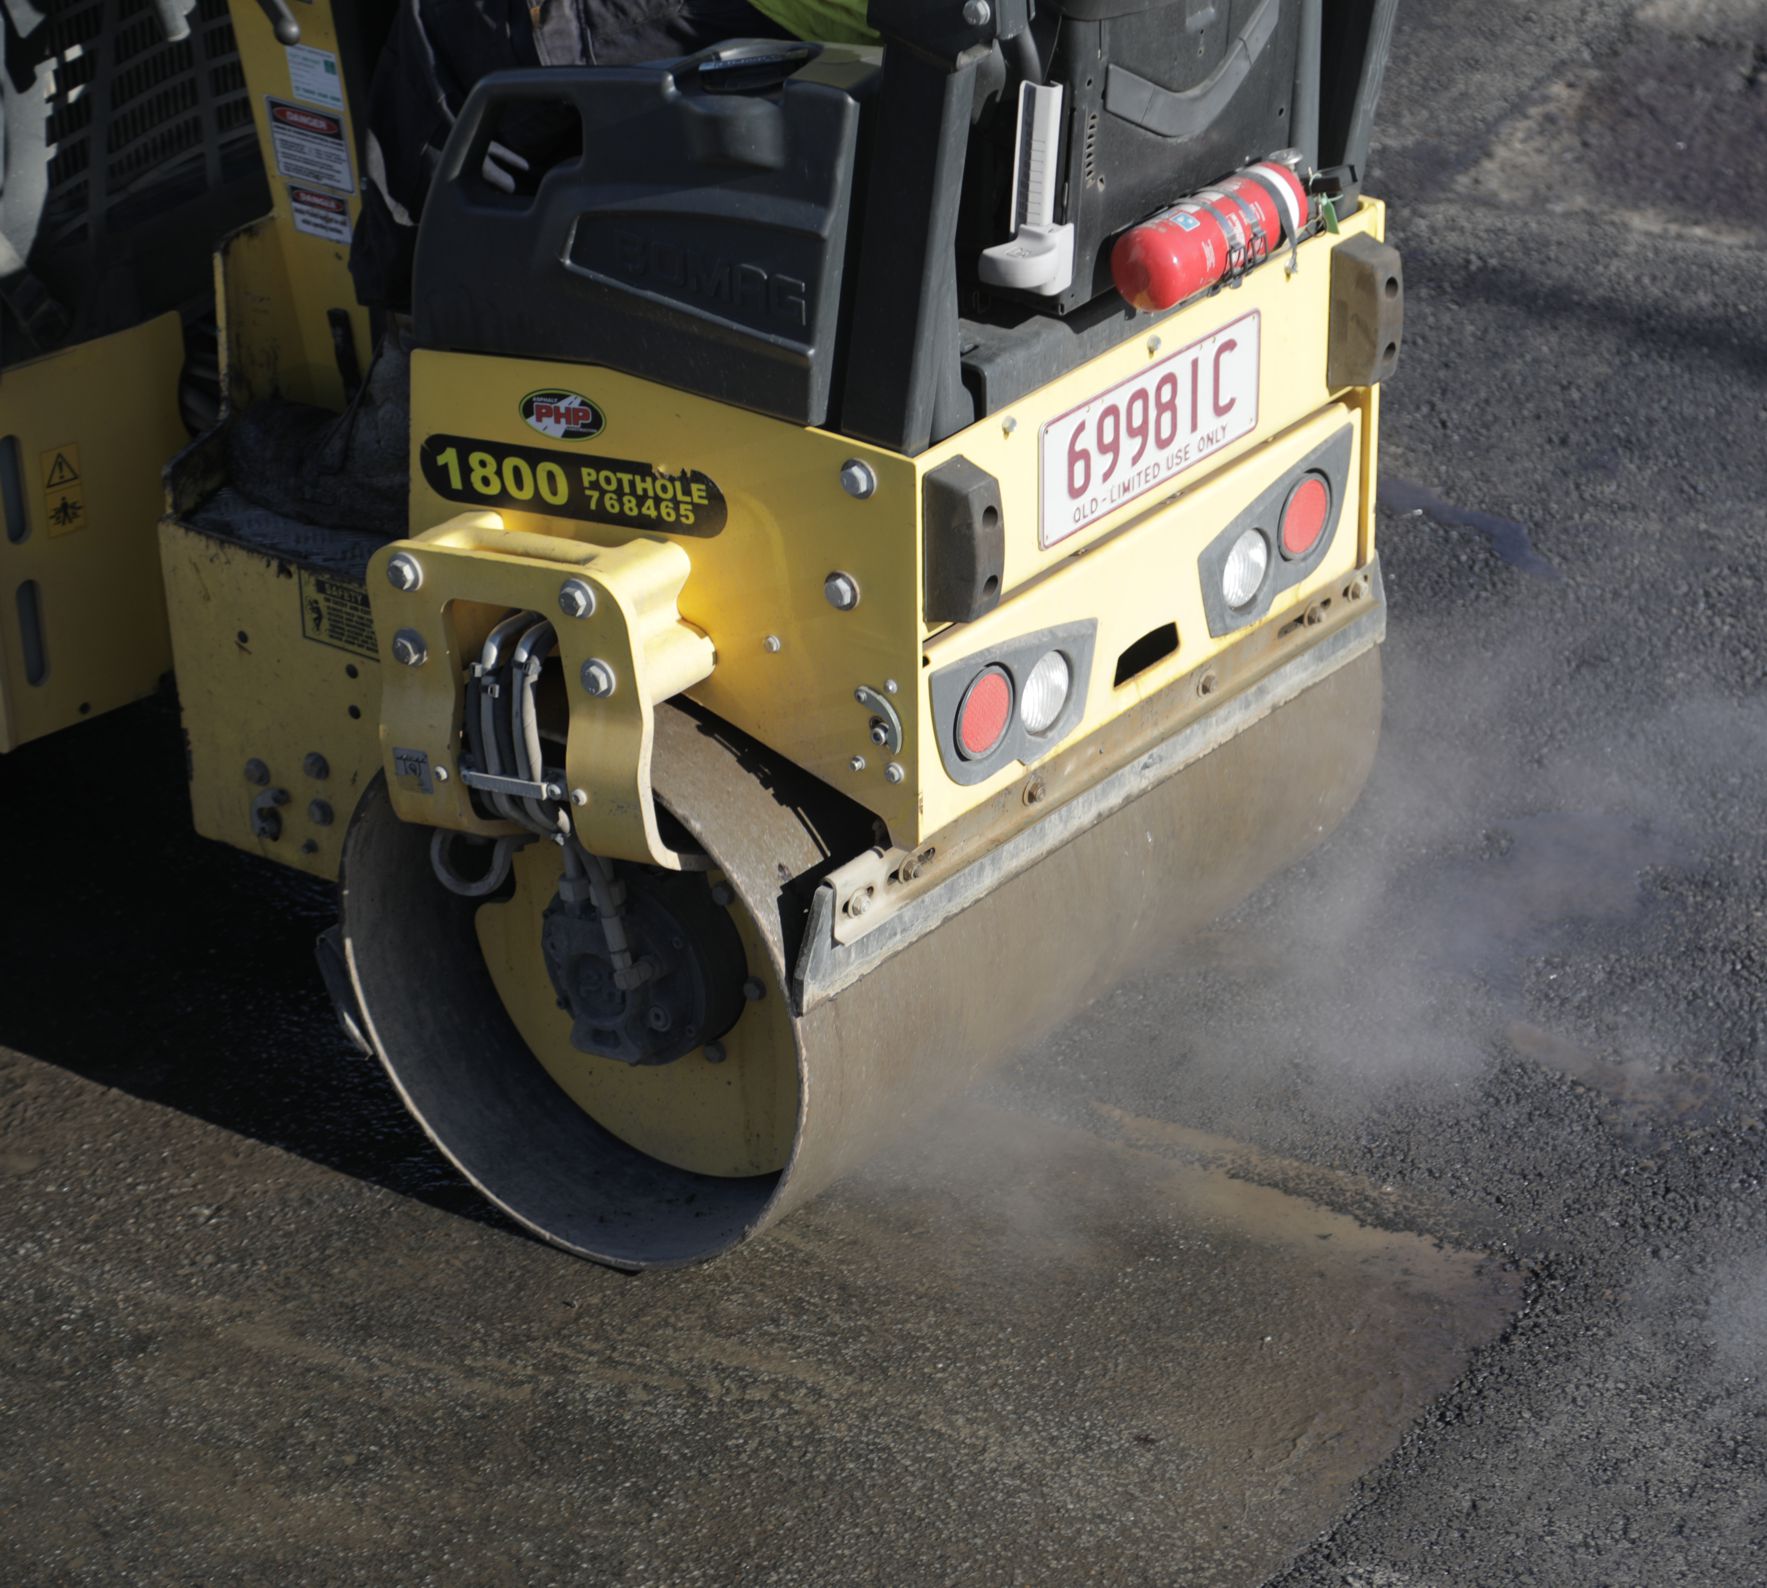 Bomag roller in action